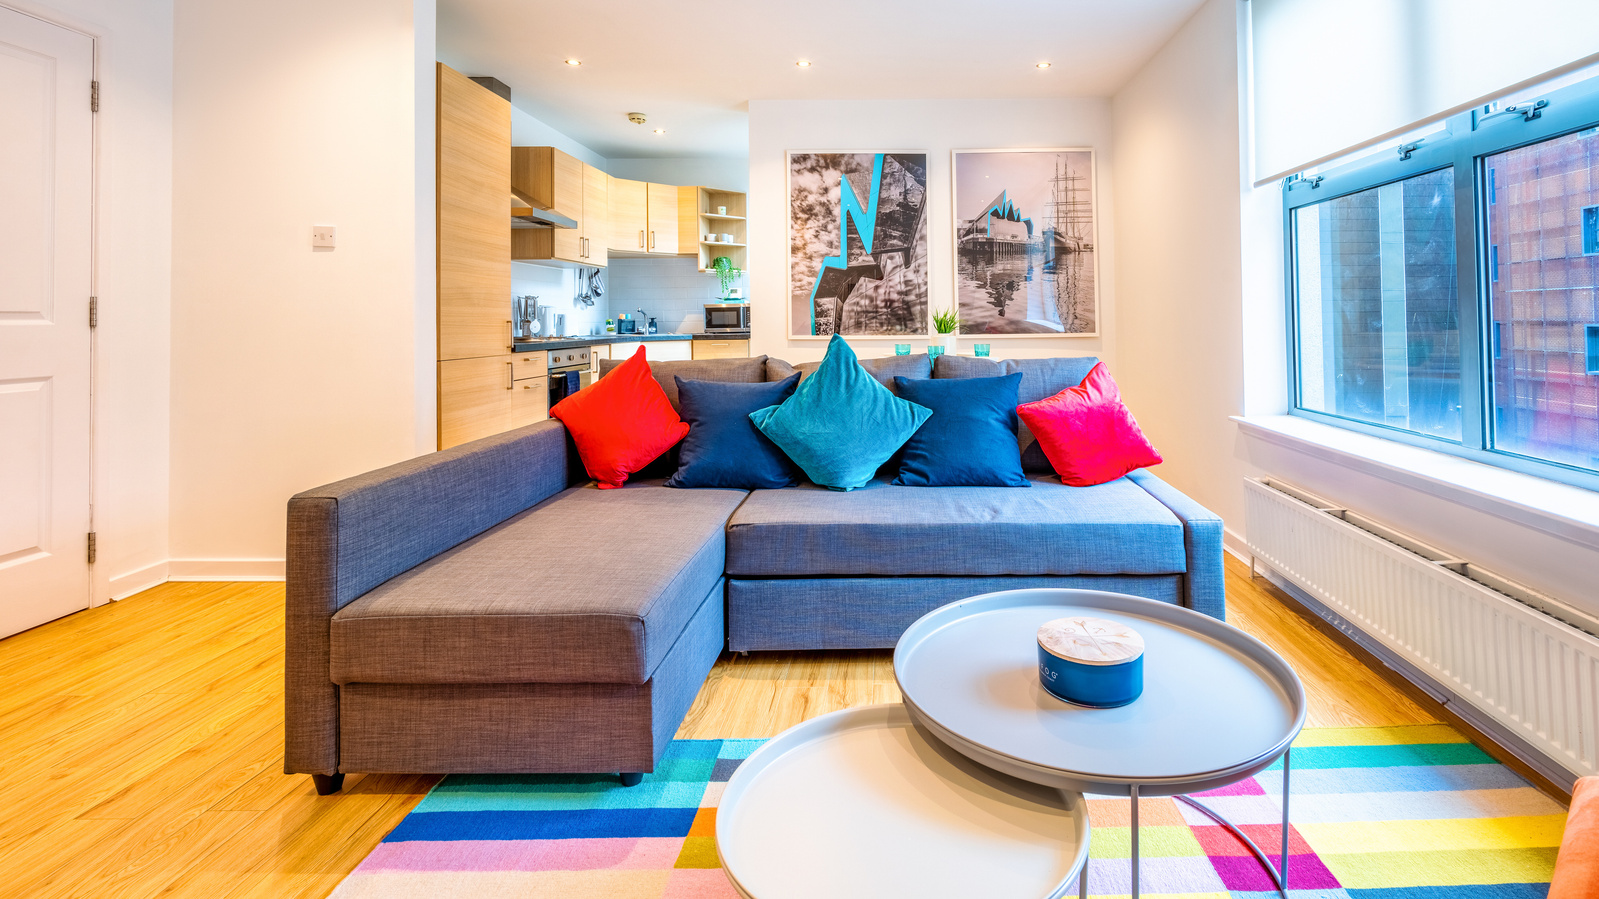 Living Room for Scotland Interior Property in Glasgow - Photography by Nate Cleary